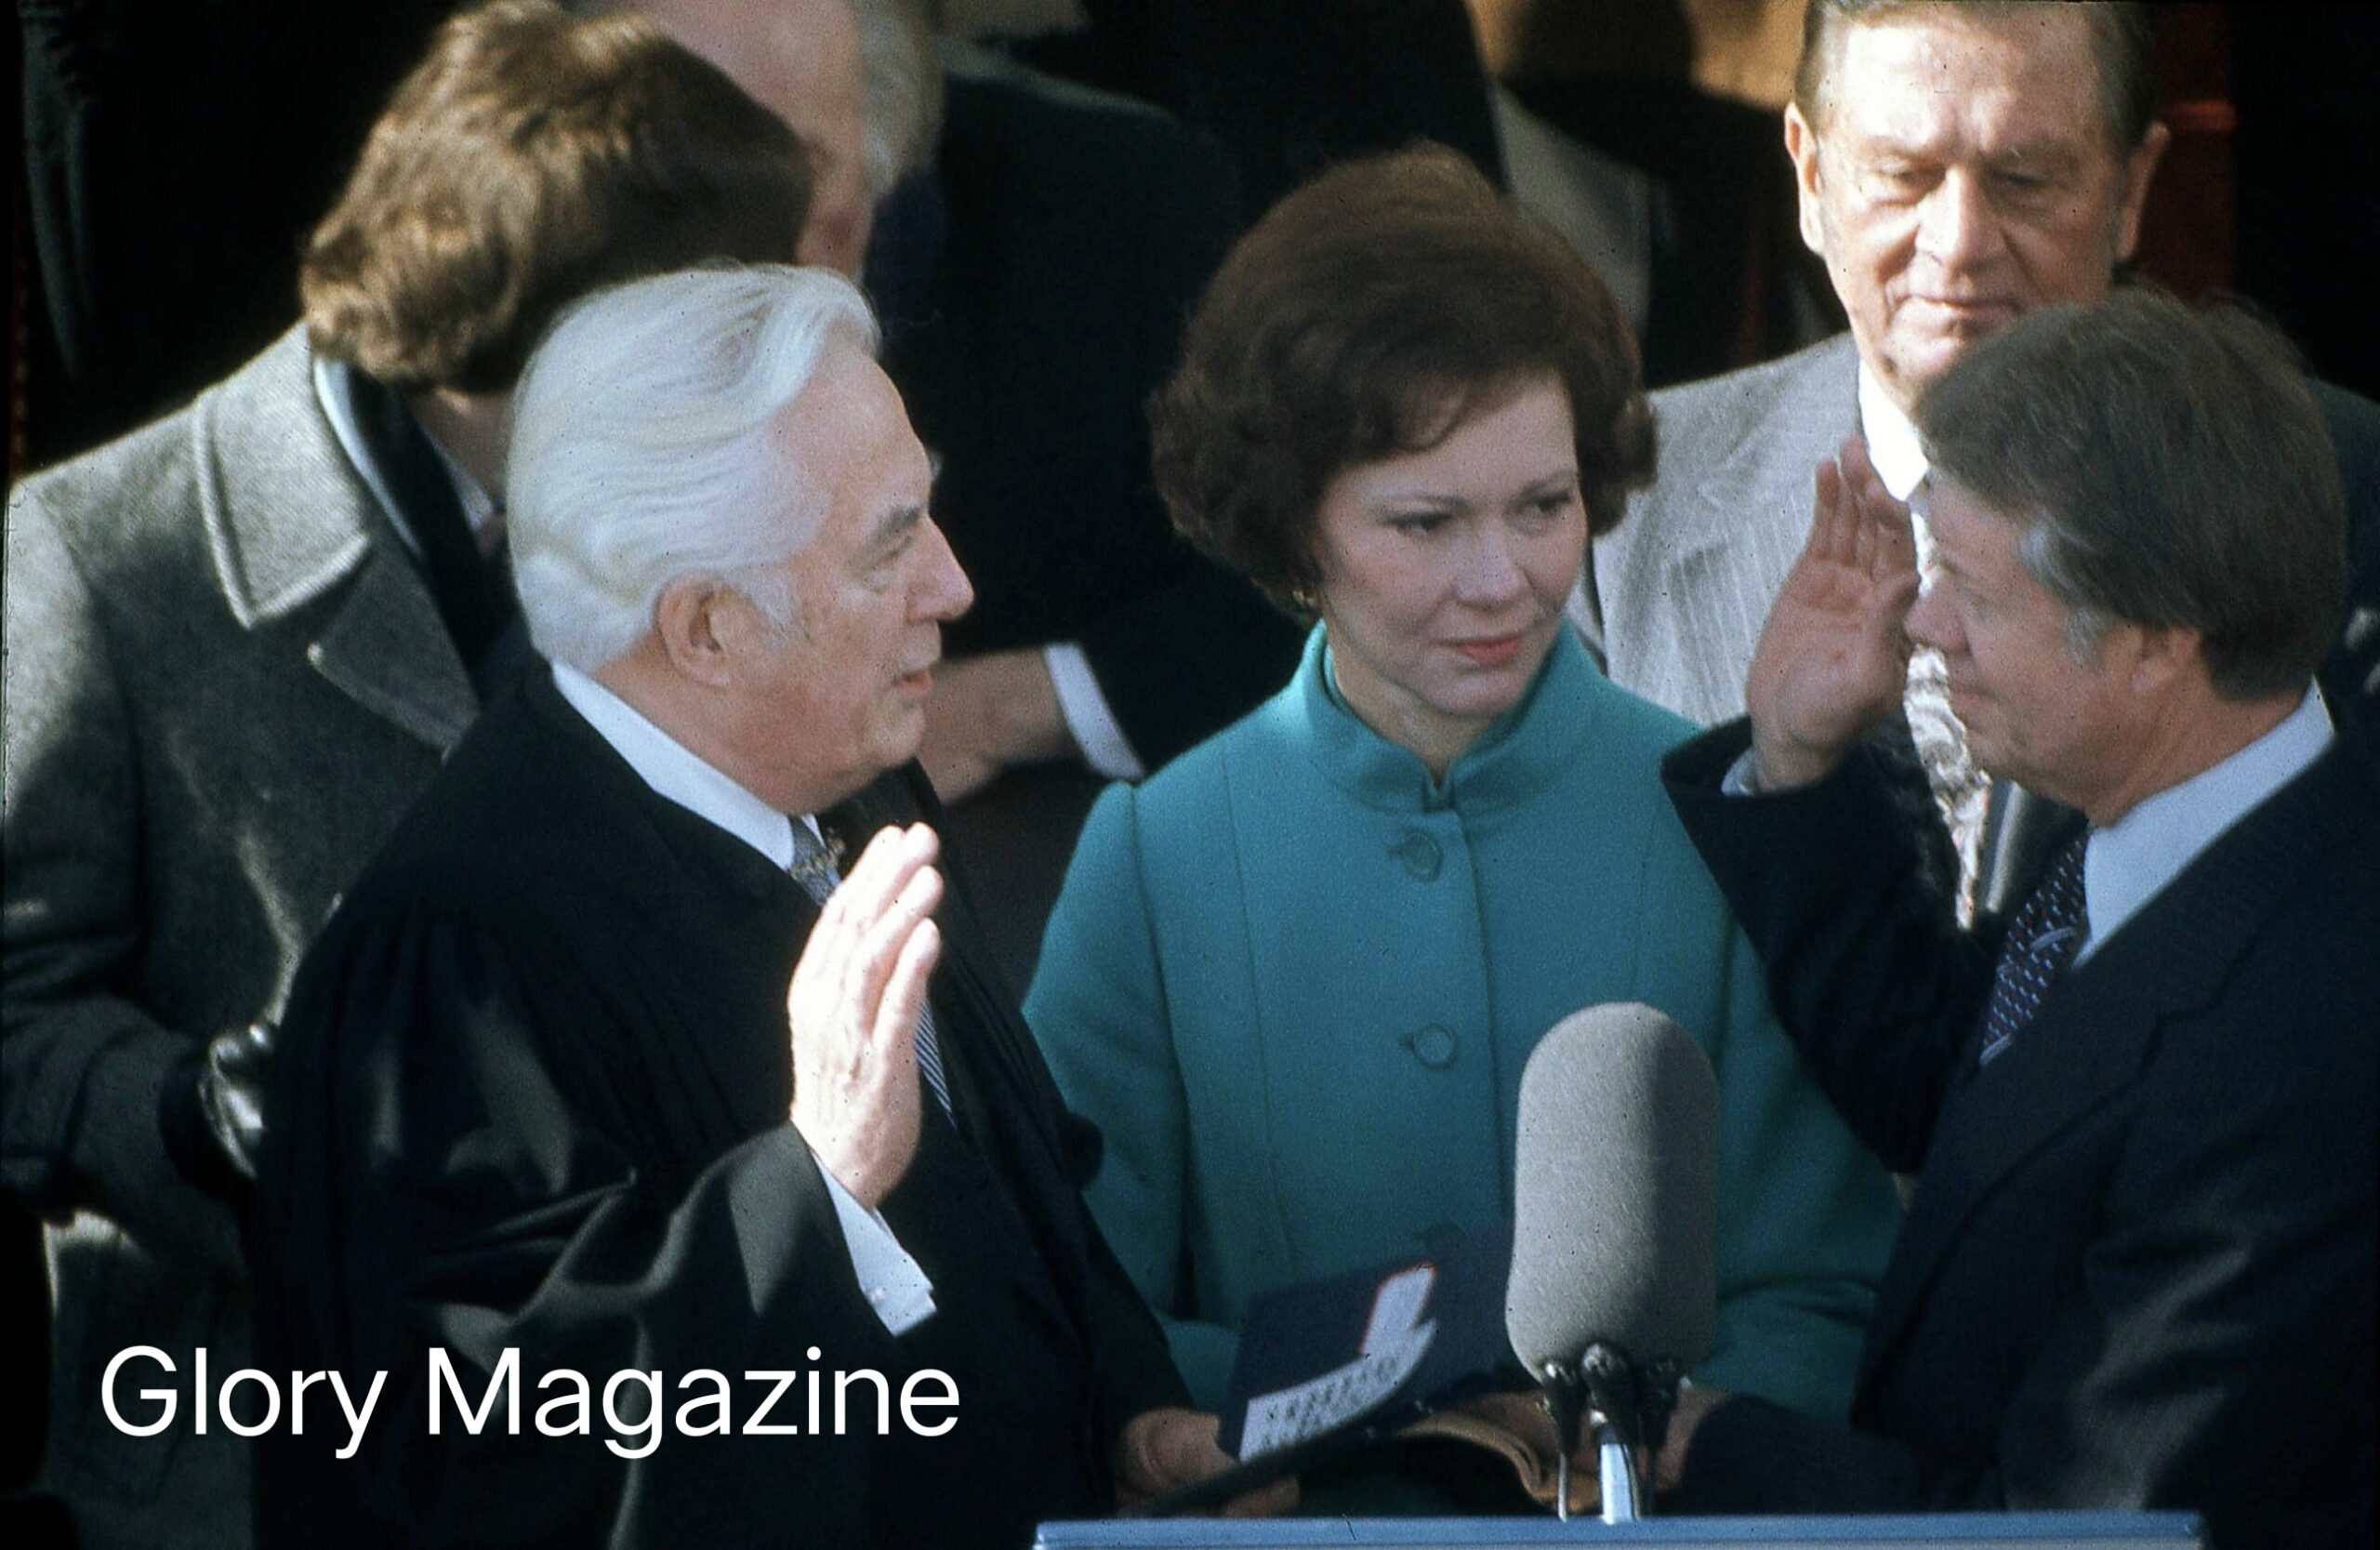 President Jimmy Carter with wife Rosalyn Carter